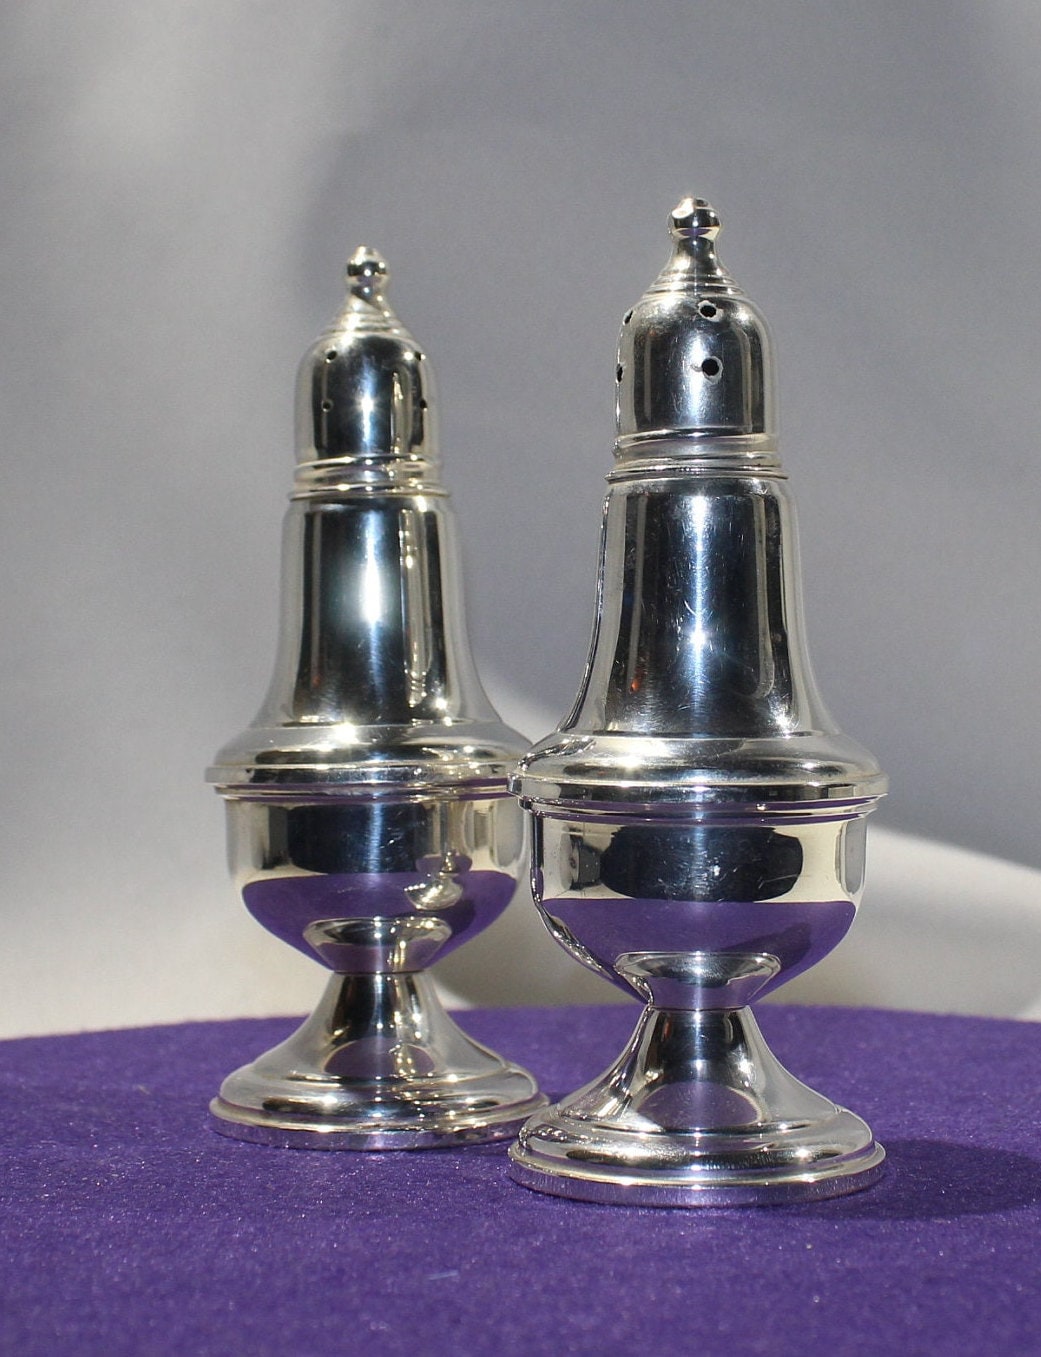 Federal Salt & Pepper Mills and Shakers - Liberty Tabletop - Made